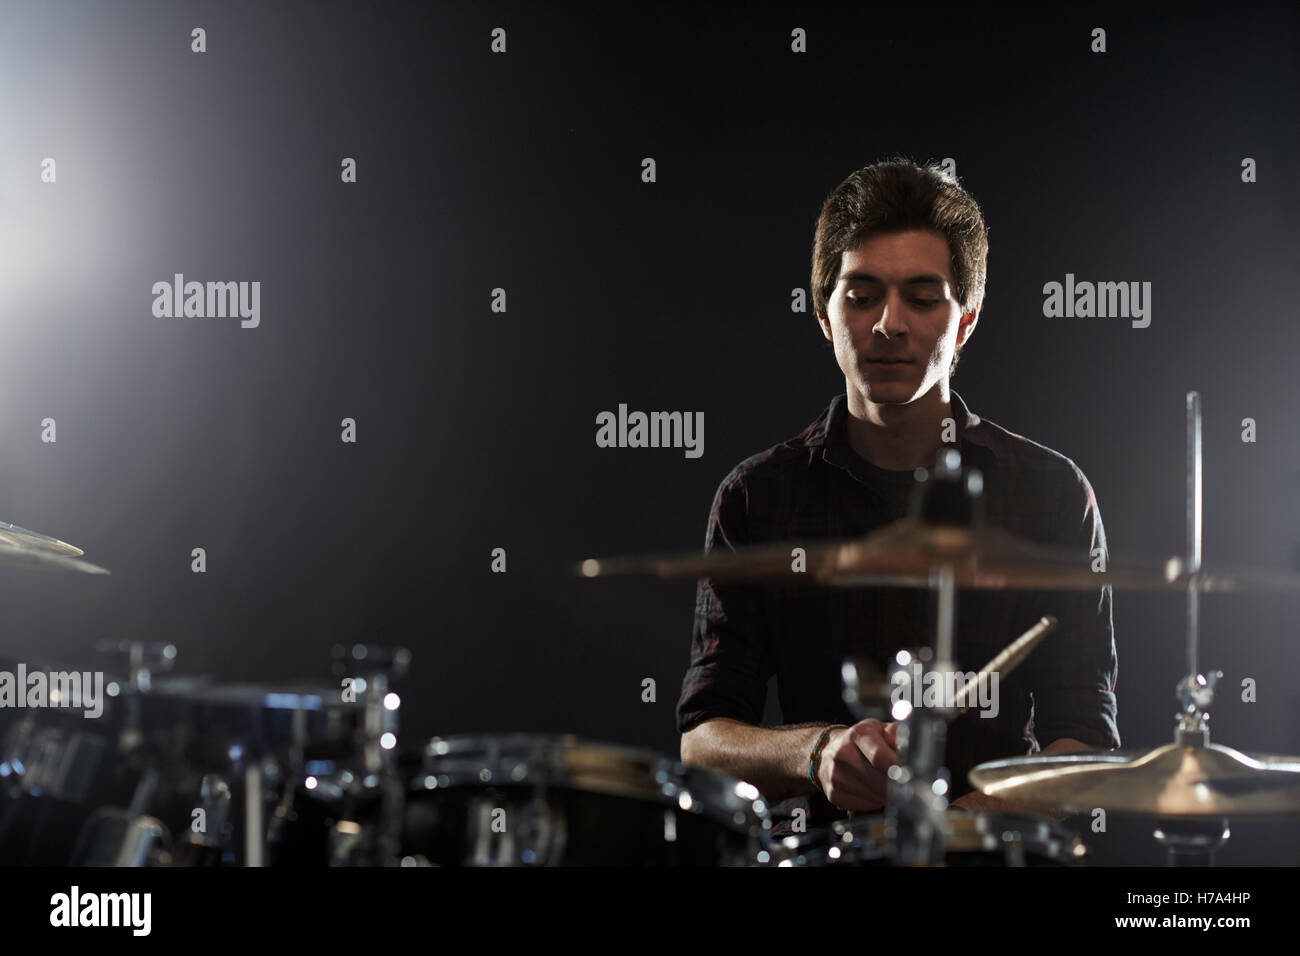 Young Drummer Playing Drum Kit In Studio Stock Photo - Alamy